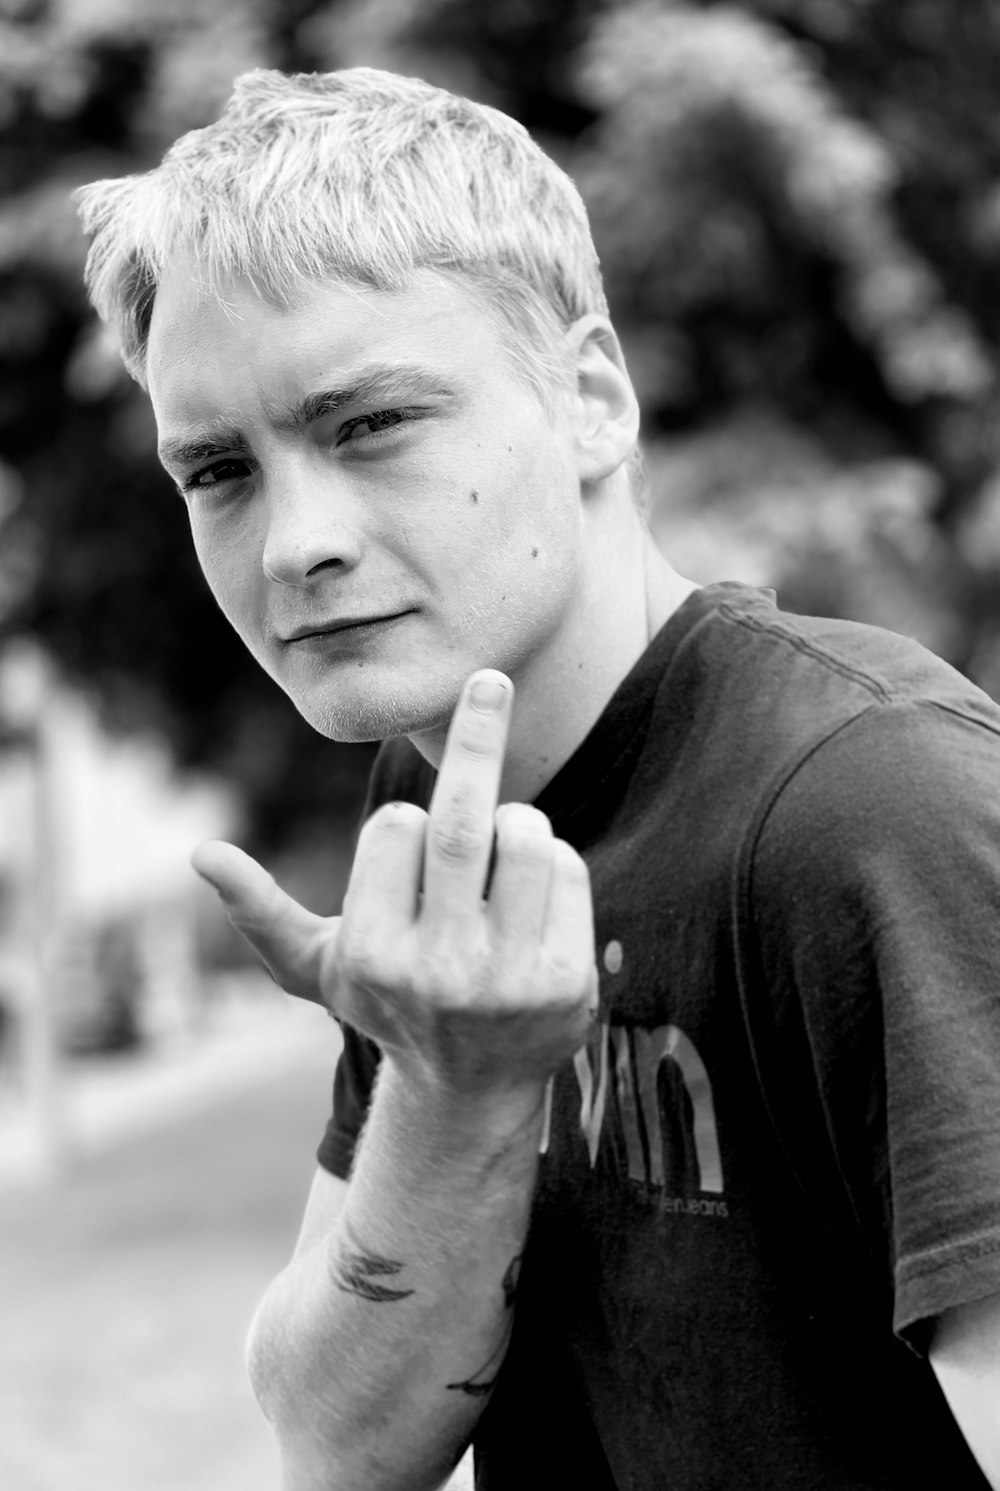 grayscale photo of man showing middle finger